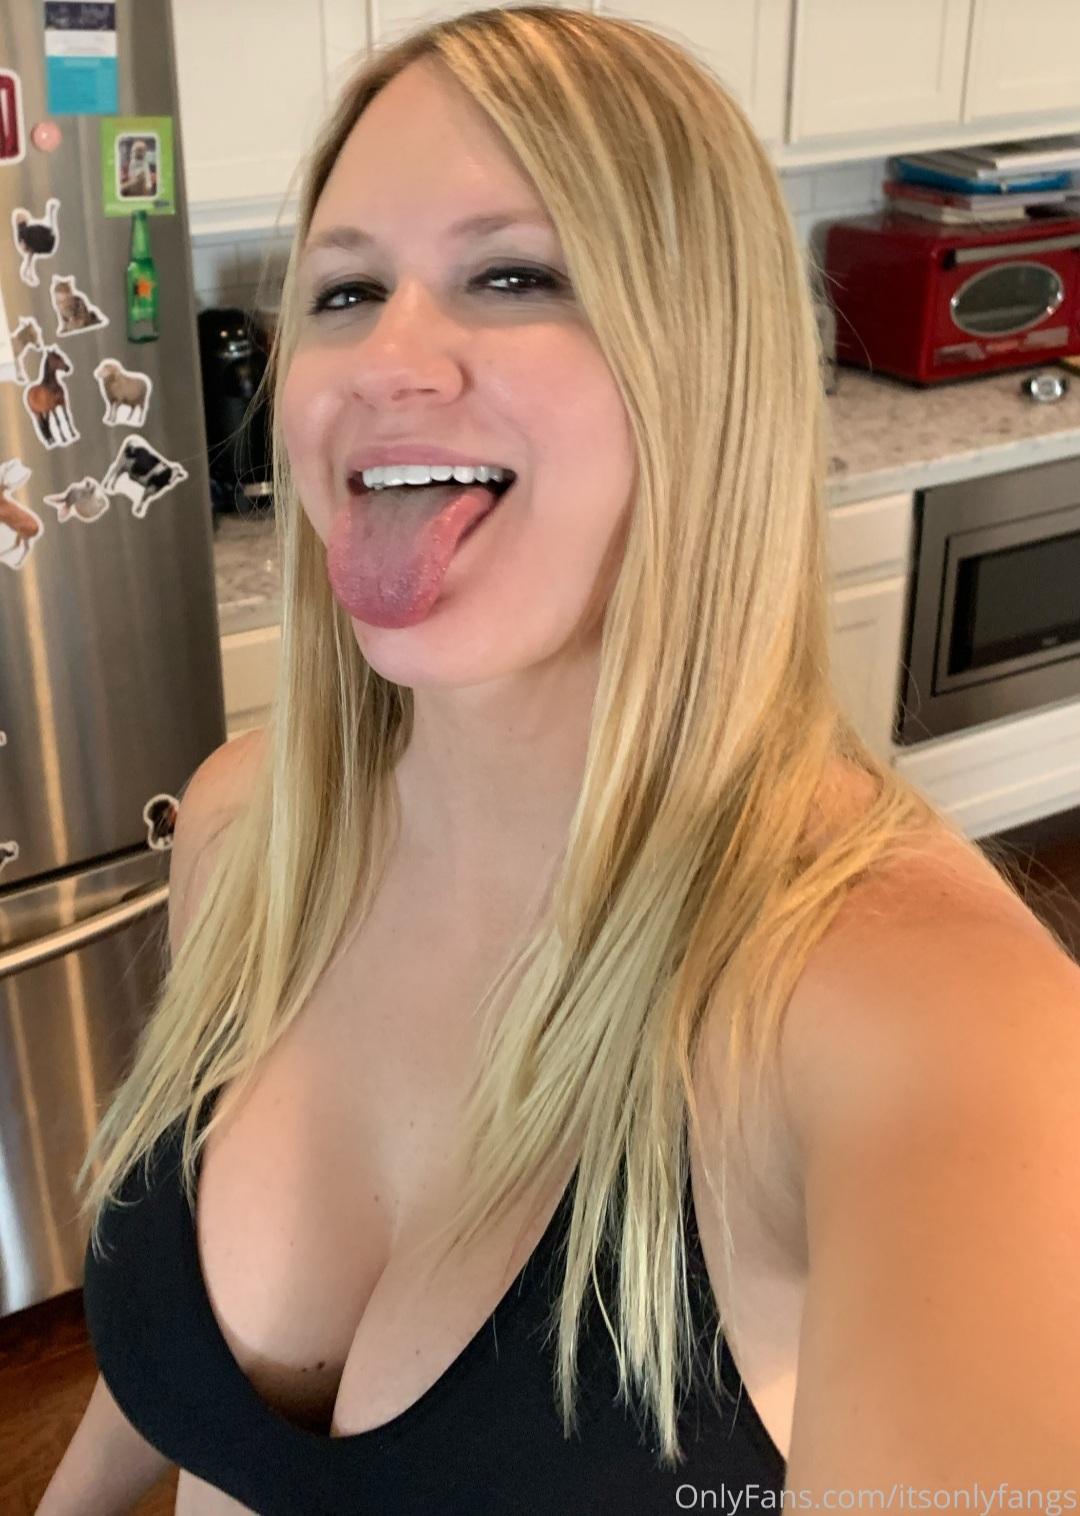 Fangs $100 nipple ppv onlyfans picture leaked